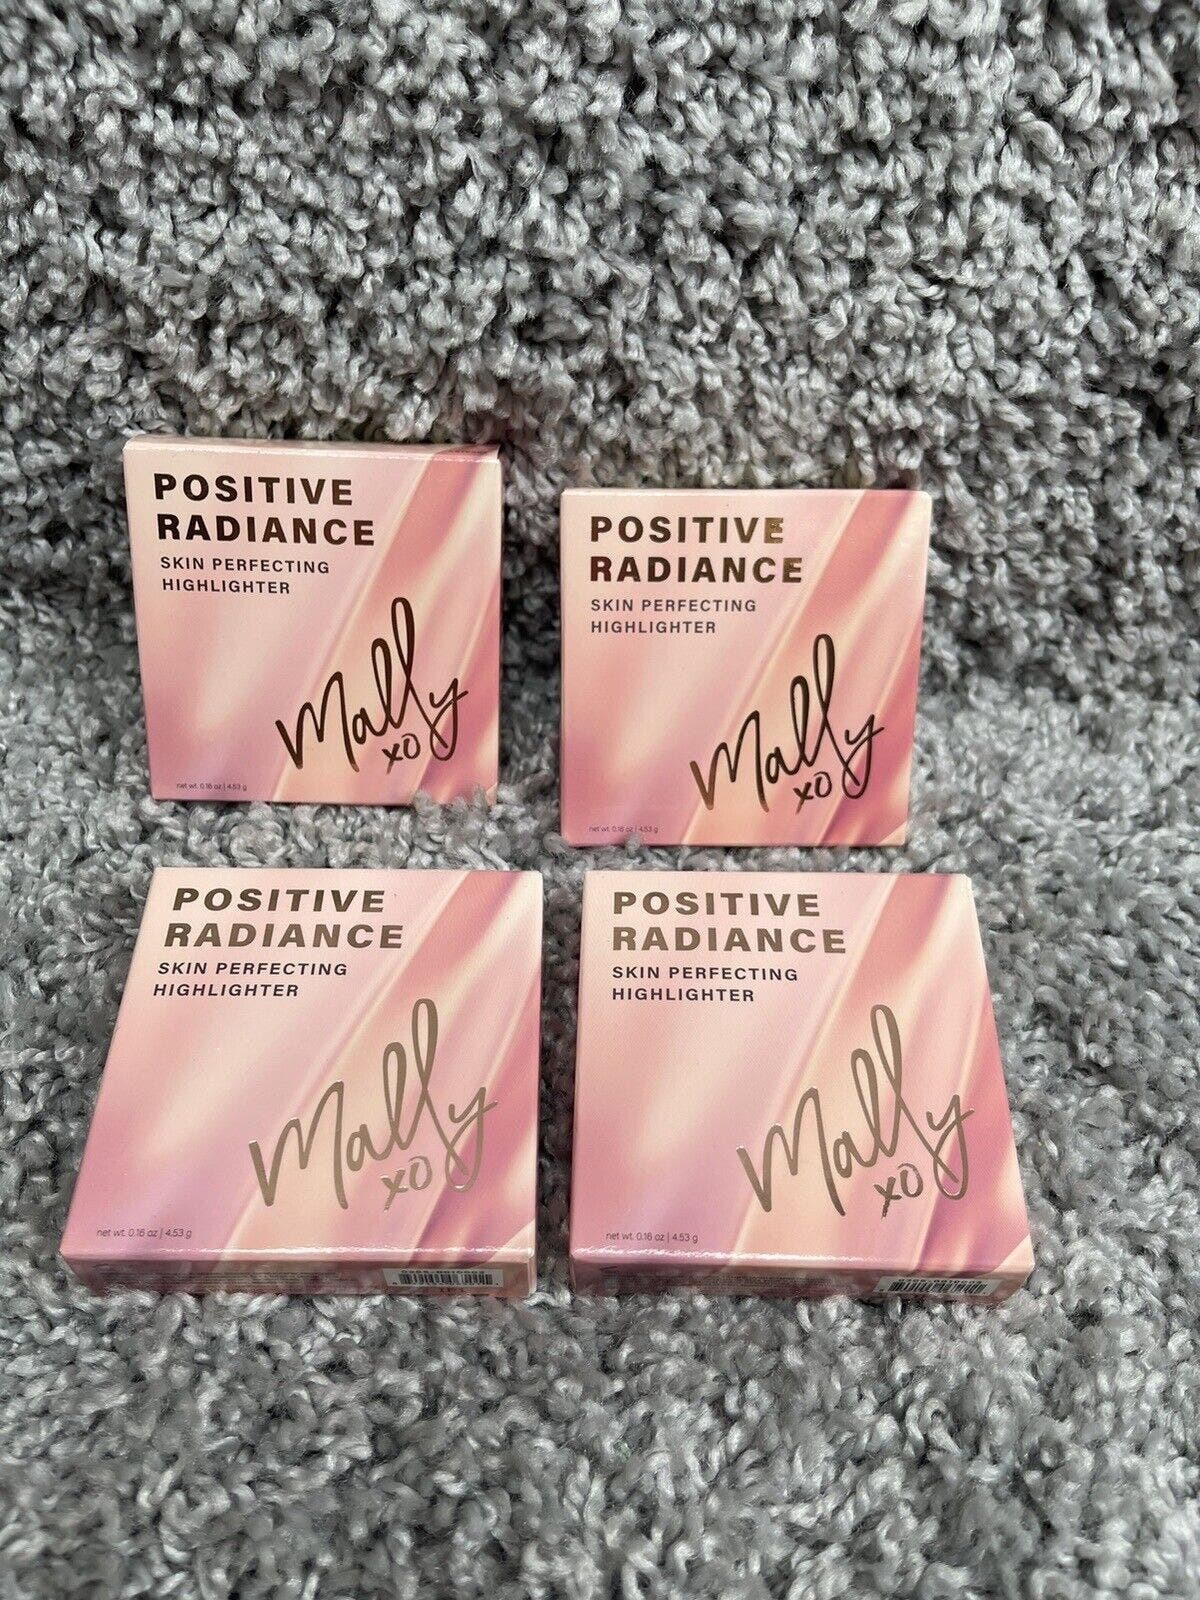 Primary image for Mally Beauty Positive Radiance Skin Perfecting Highlighter Sparkling Champagne 4